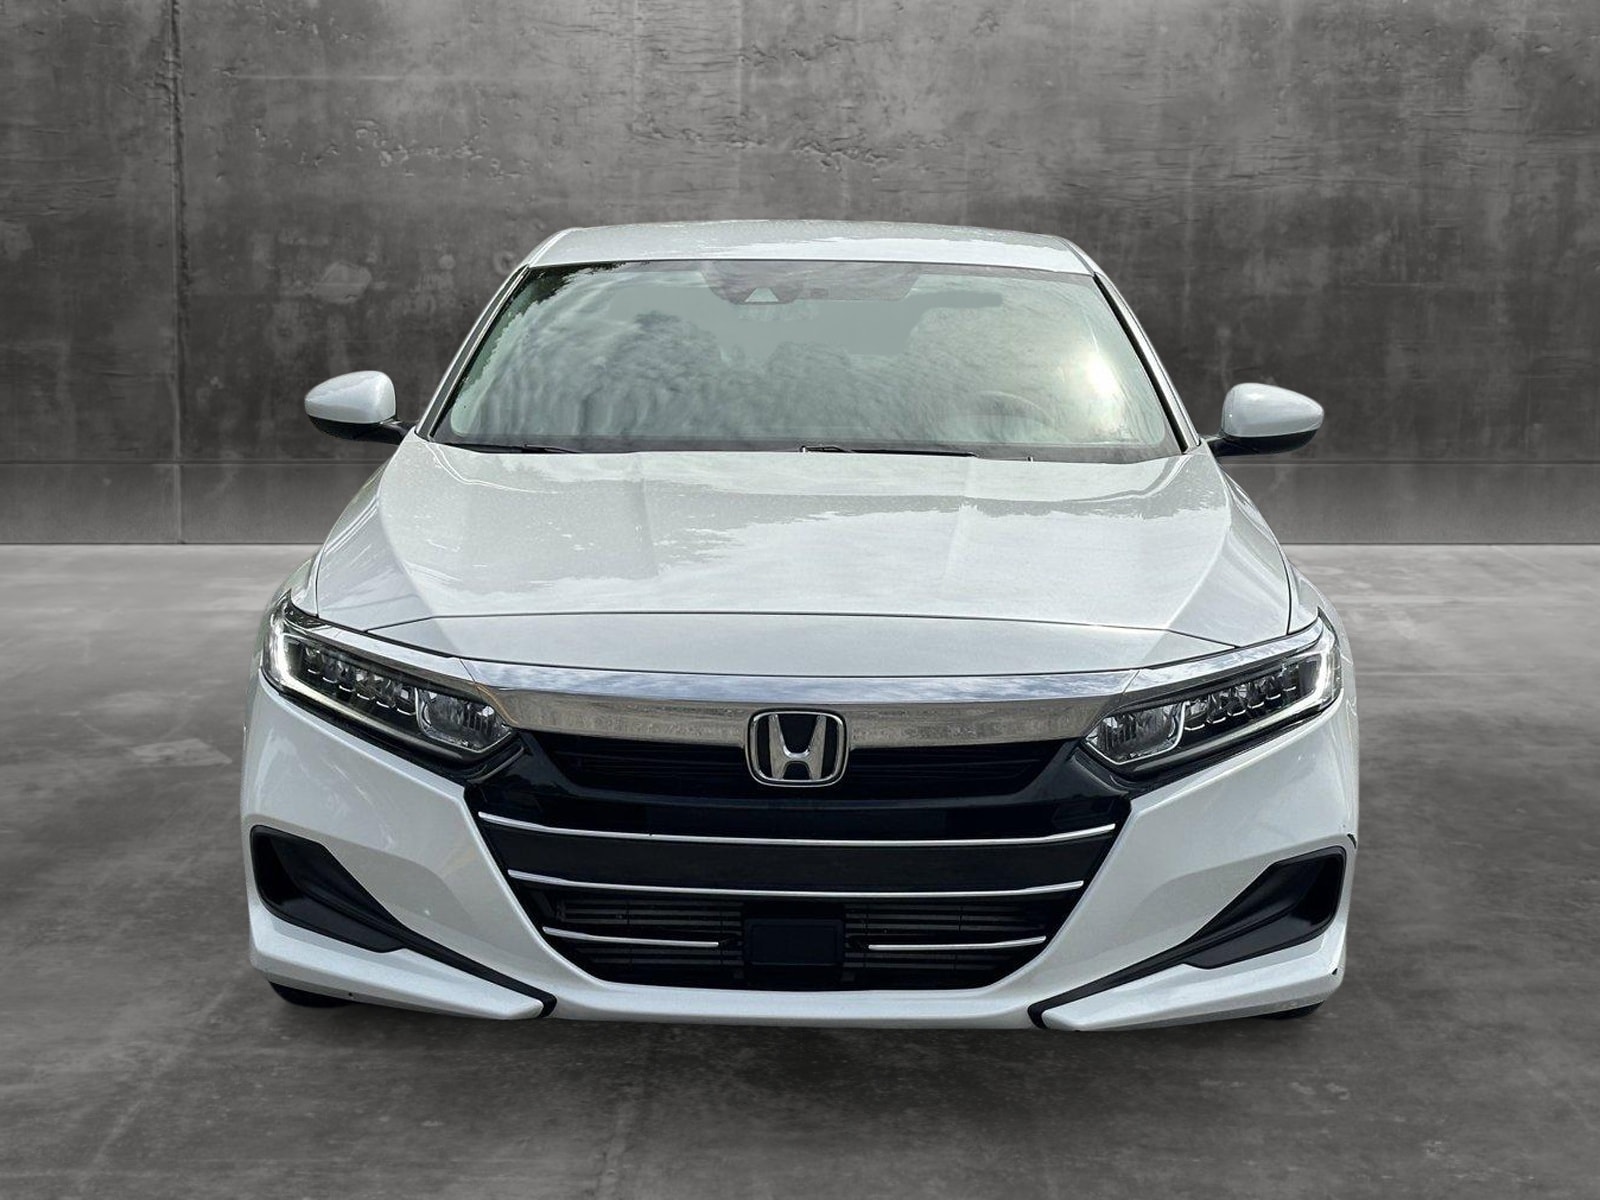 Used 2021 Honda Accord LX with VIN 1HGCV1F10MA041282 for sale in Hollywood, FL